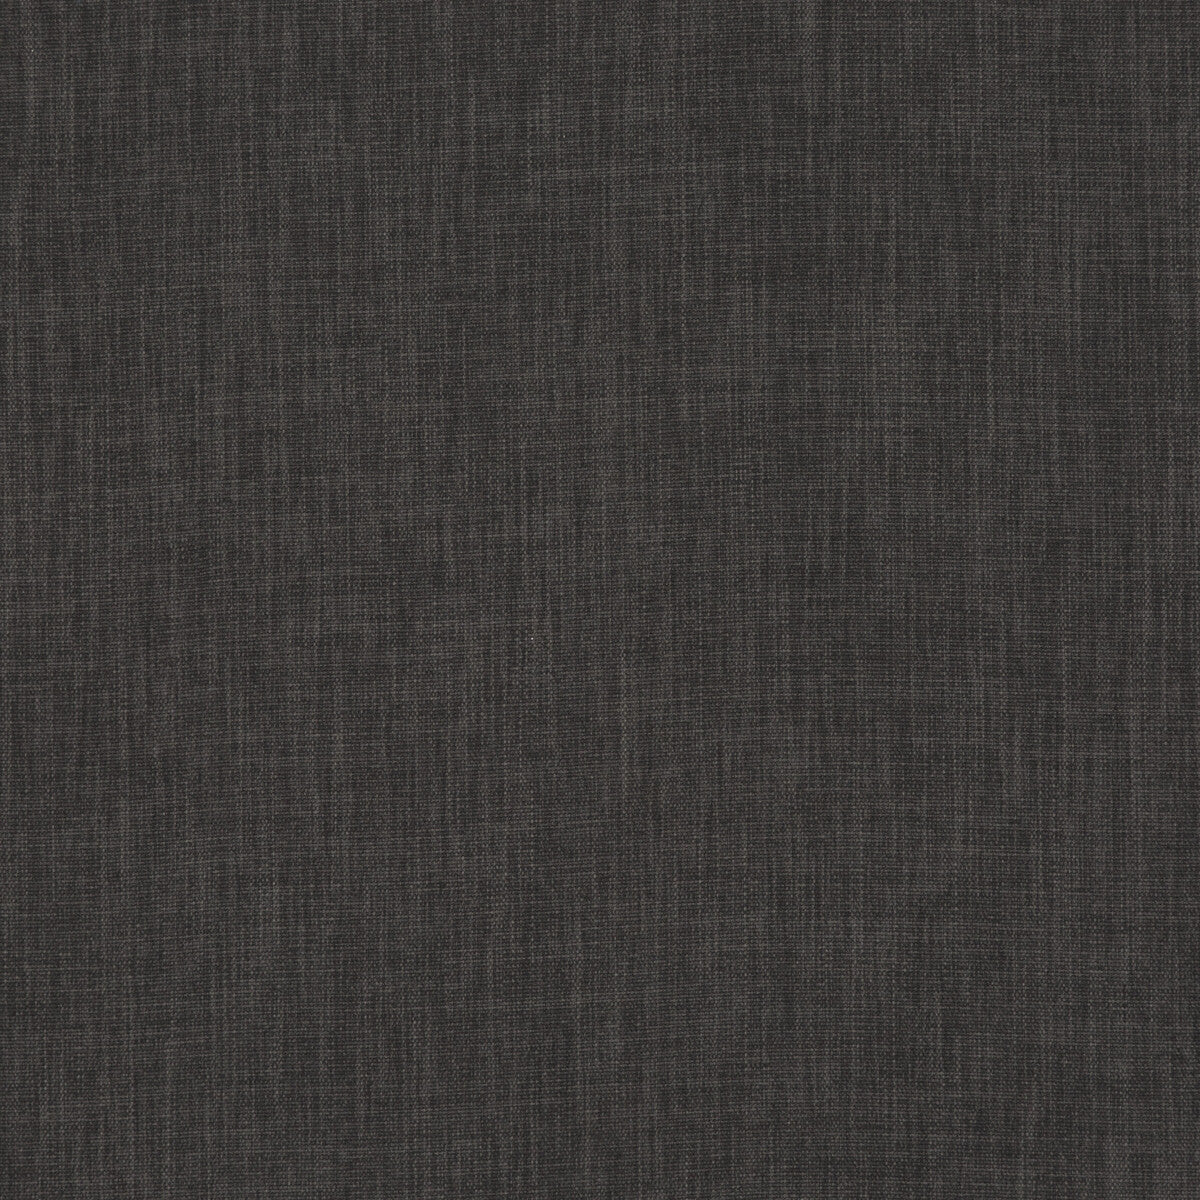 Fernshaw fabric in anthracite color - pattern PF50410.950.0 - by Baker Lifestyle in the Notebooks collection